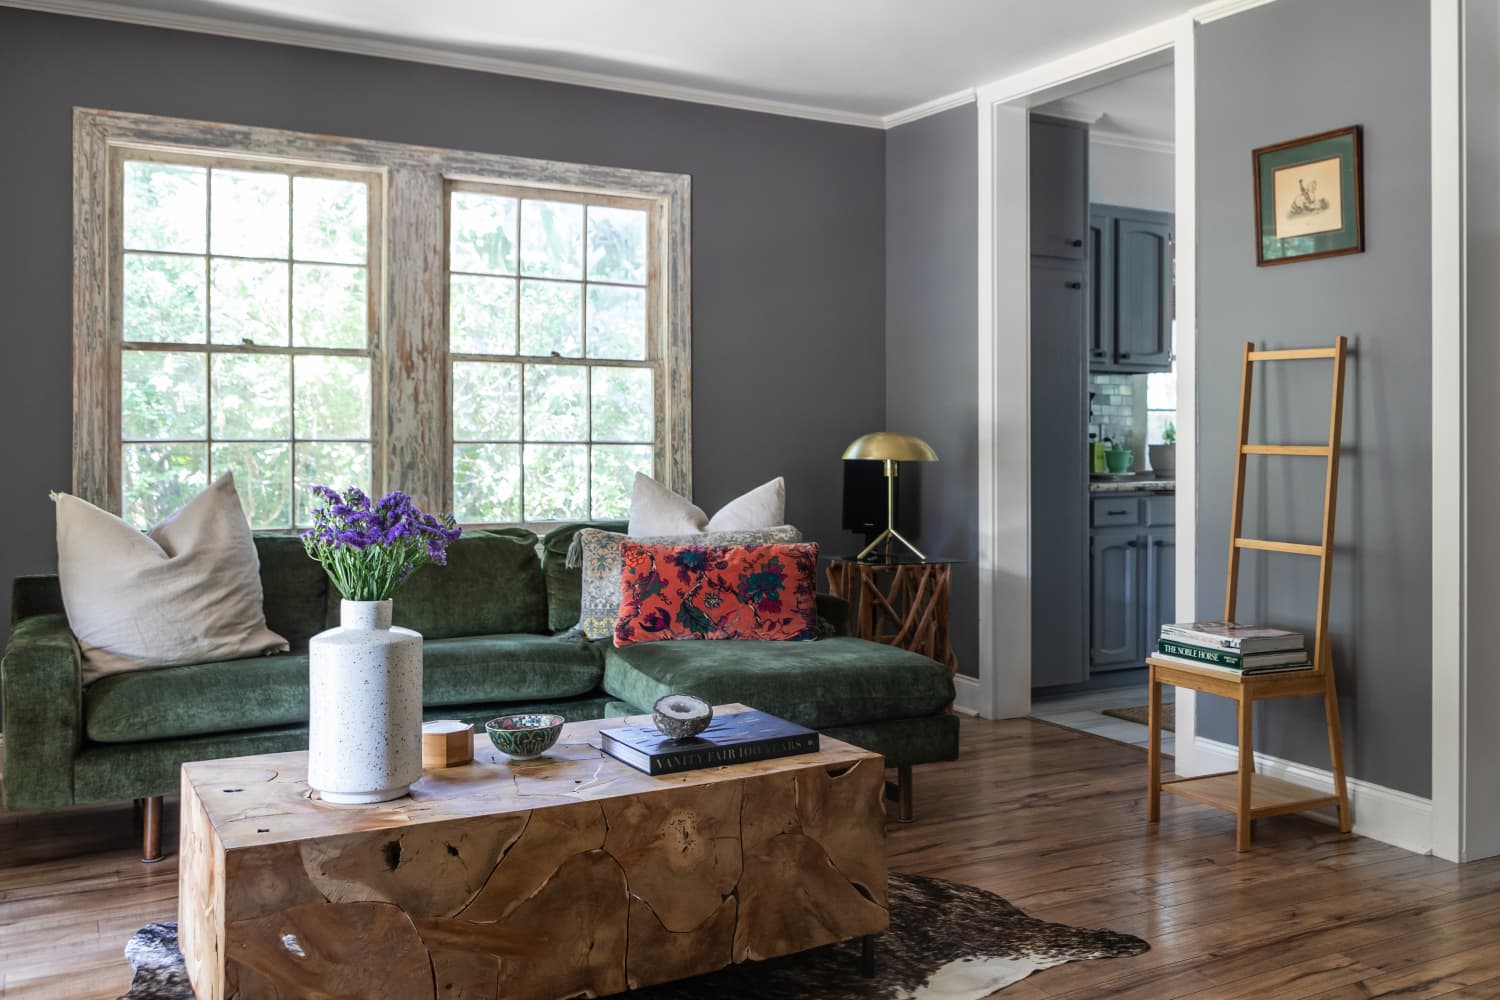 These Are The 7 Most Popular Living Room Colors of 2022 ...